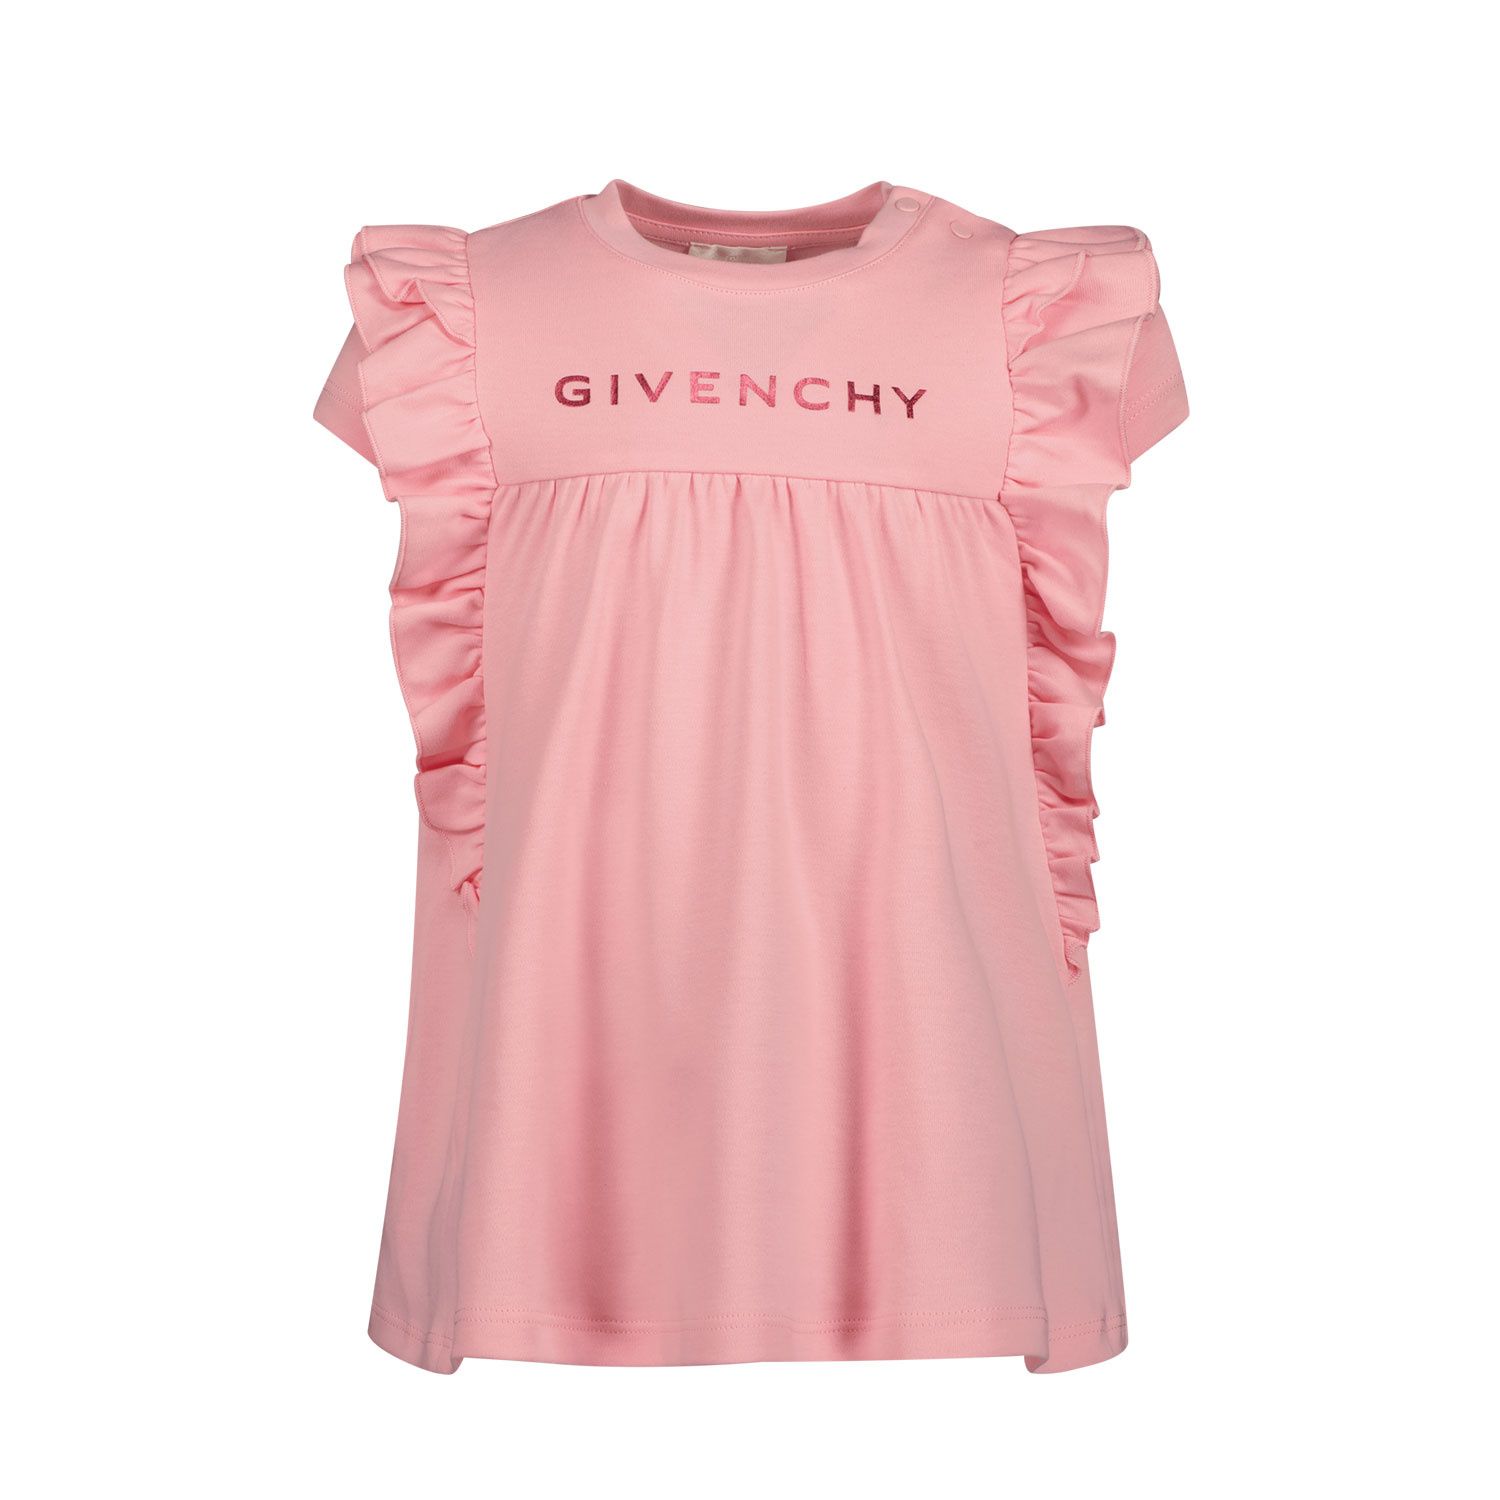 Picture of Givenchy H02090 baby dress pink